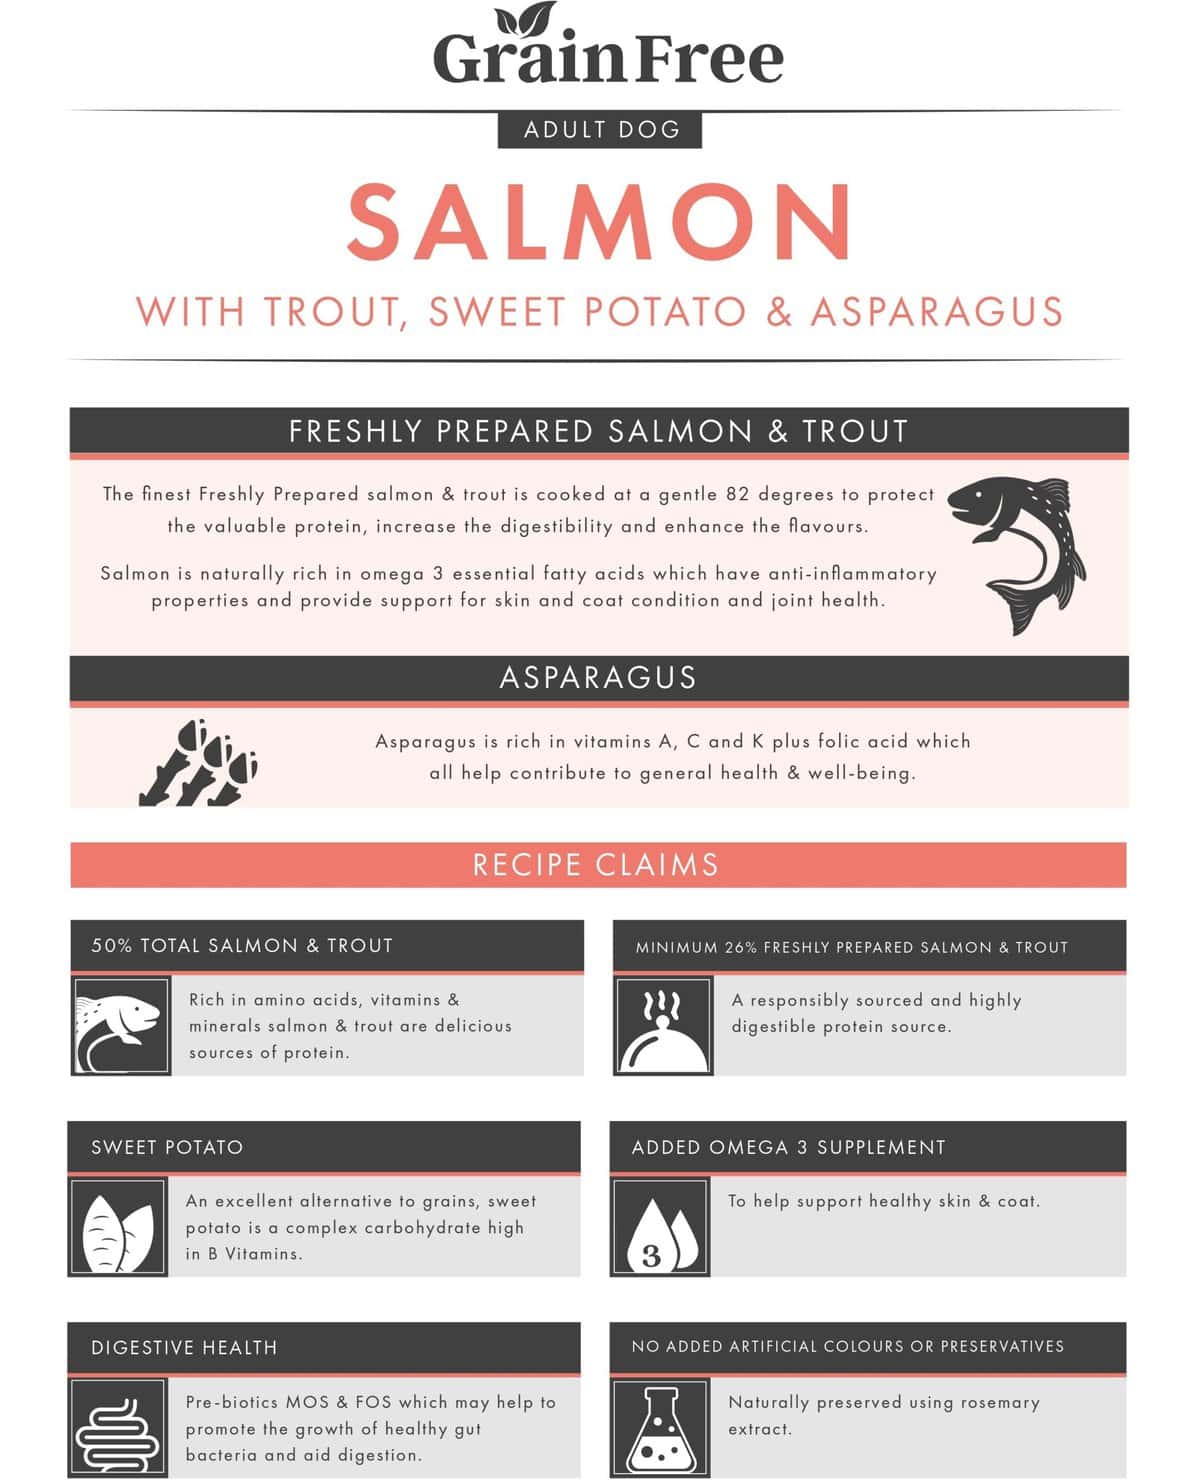 Grain Free Adult Dog 50% Salmon with Trout, Sweet Potato & Asparagus Complete Dry Food